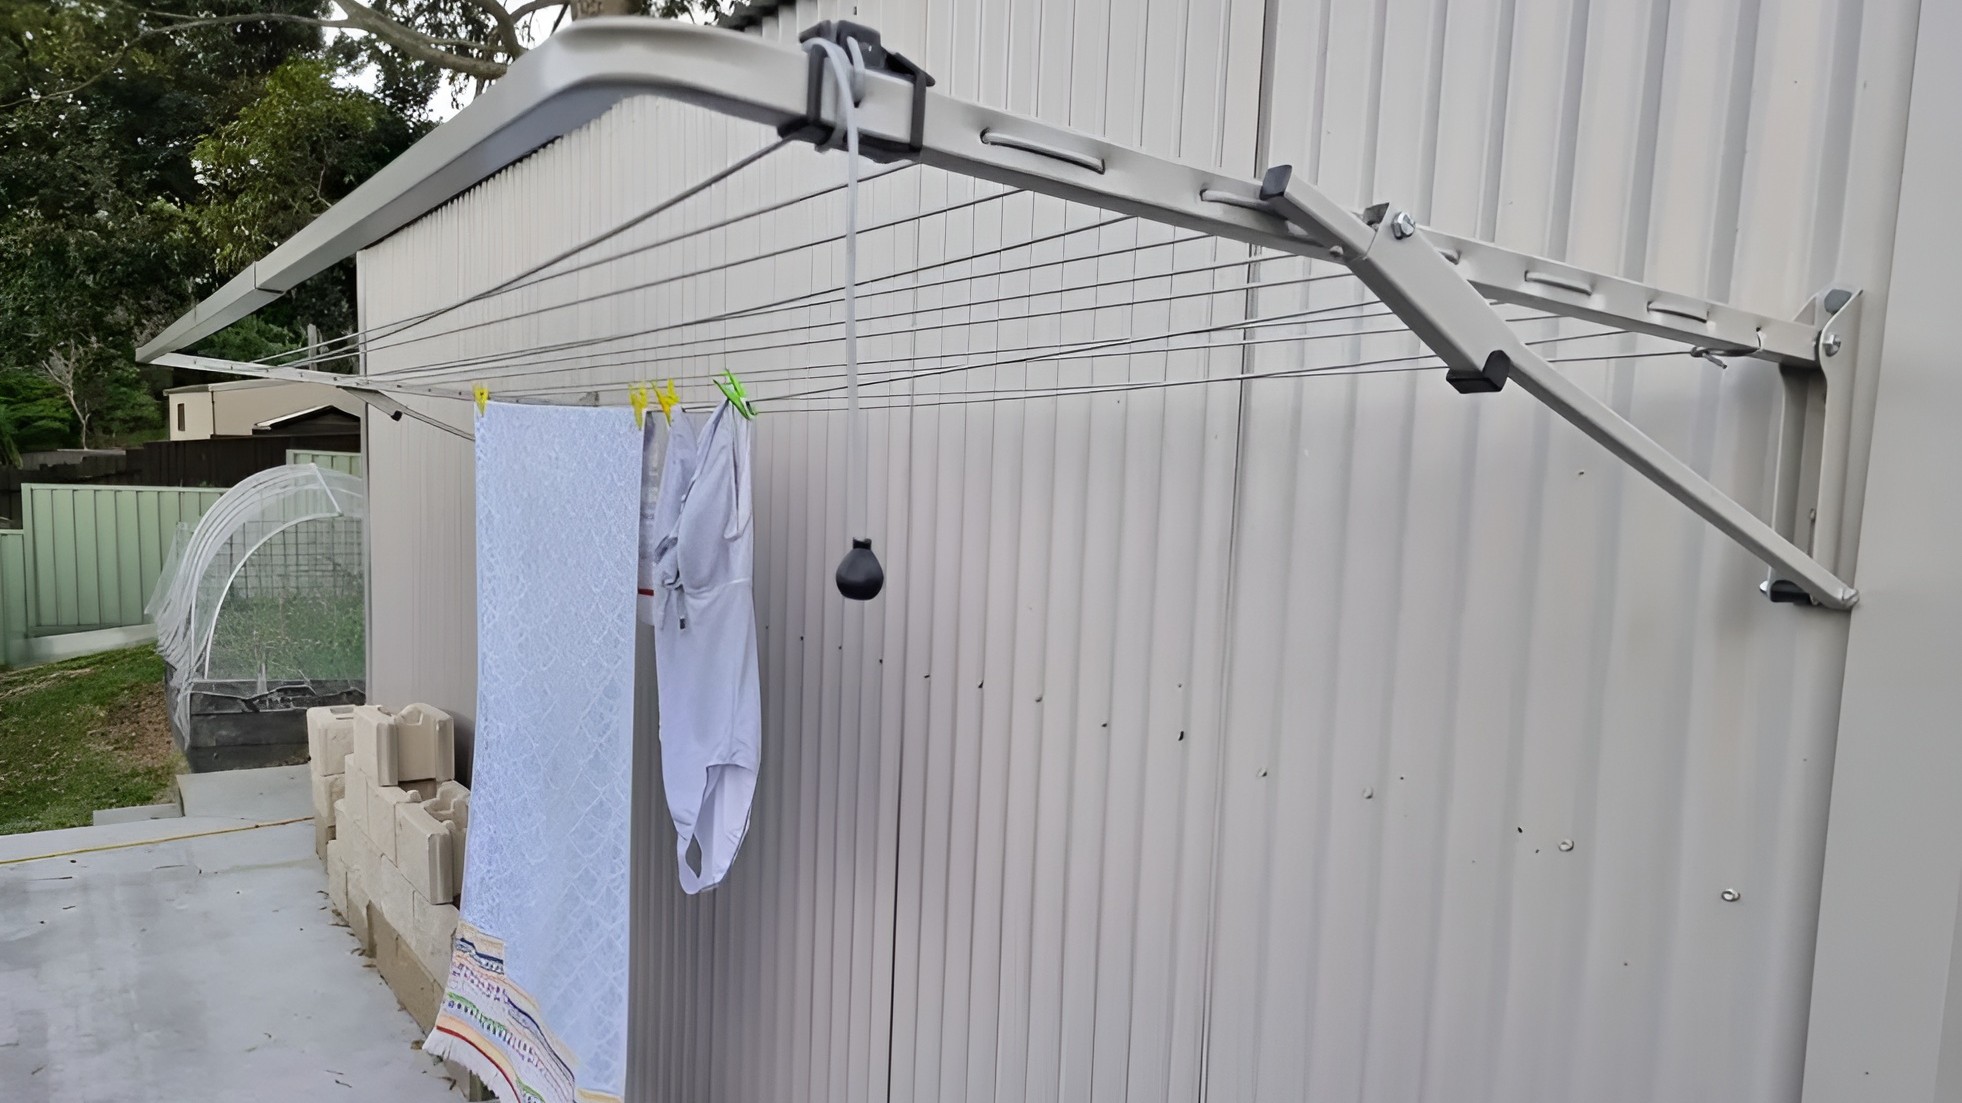 Fold Down Clothes Line for King Sheets Line Tension and Replacement